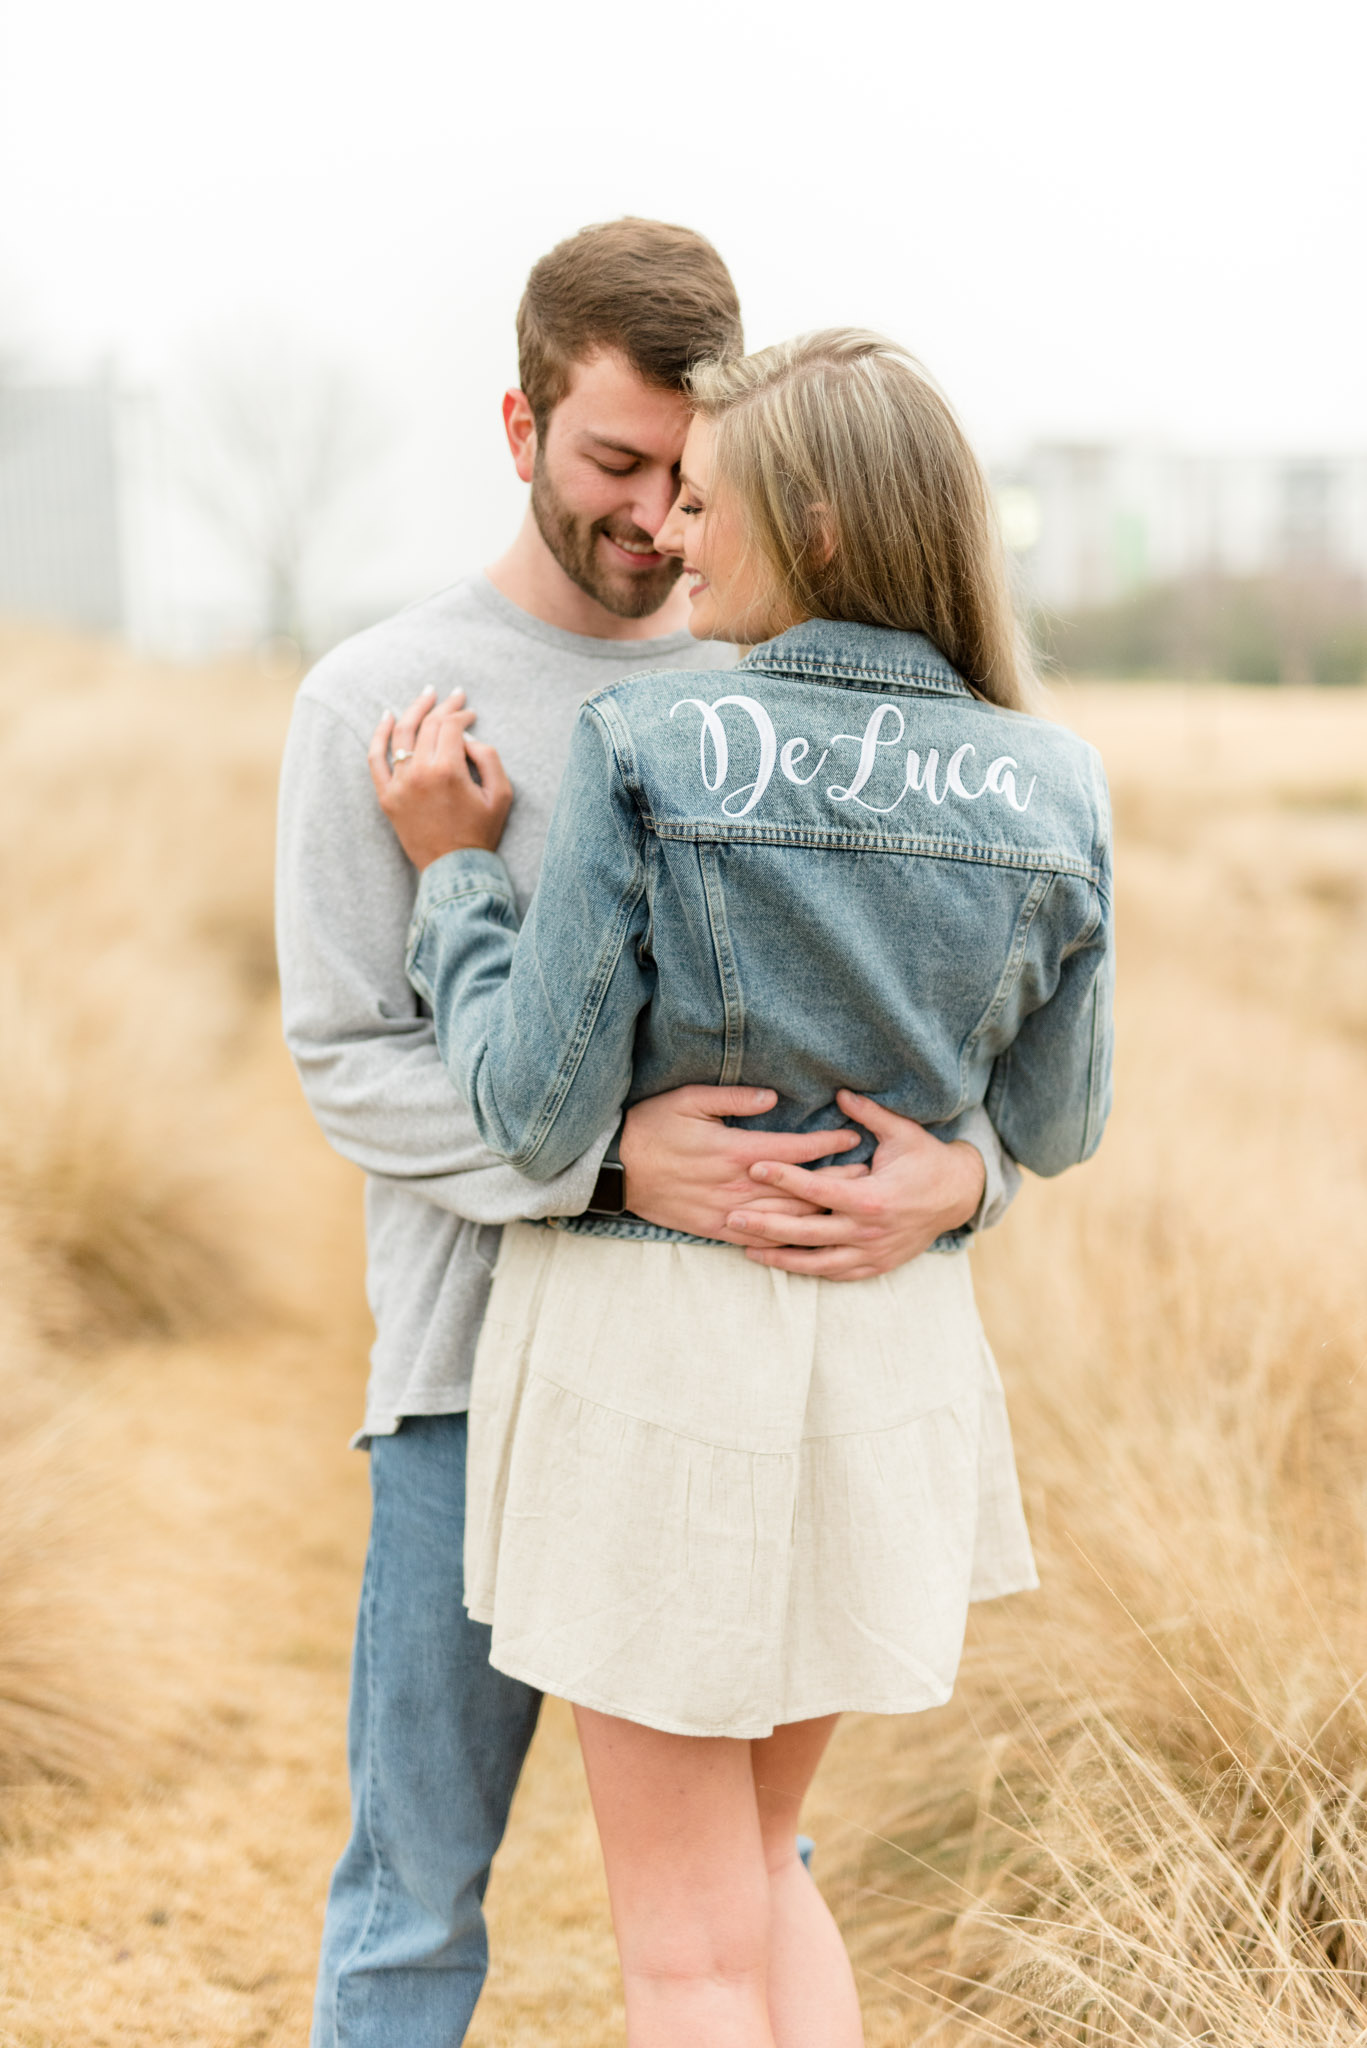 Couple hugs and woman shows off personalized jacket.